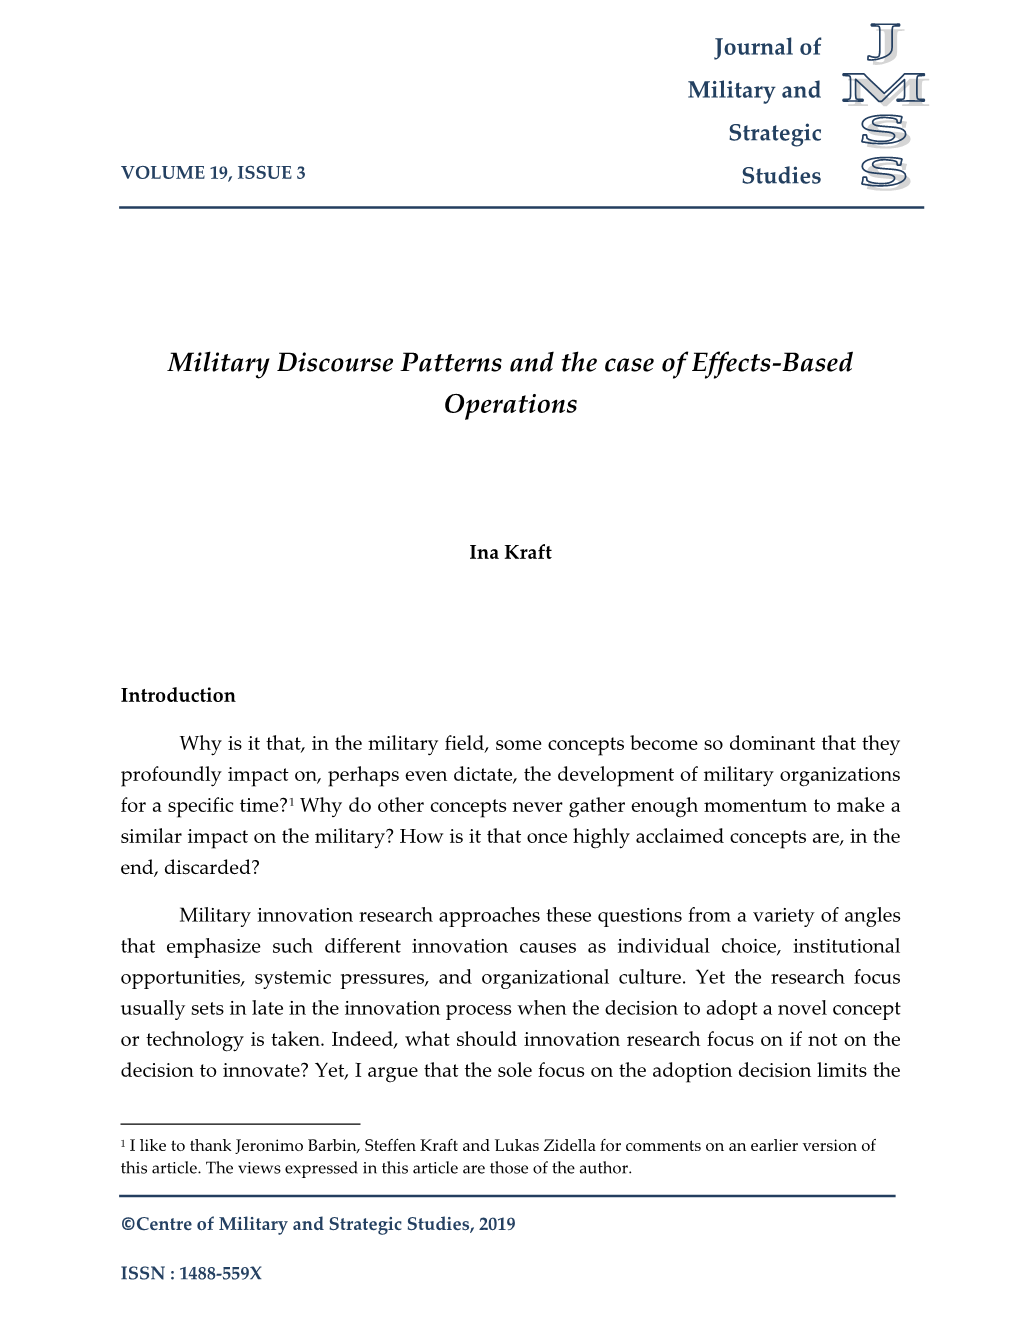 Military Discourse Patterns and the Case of Effects-Based Operations